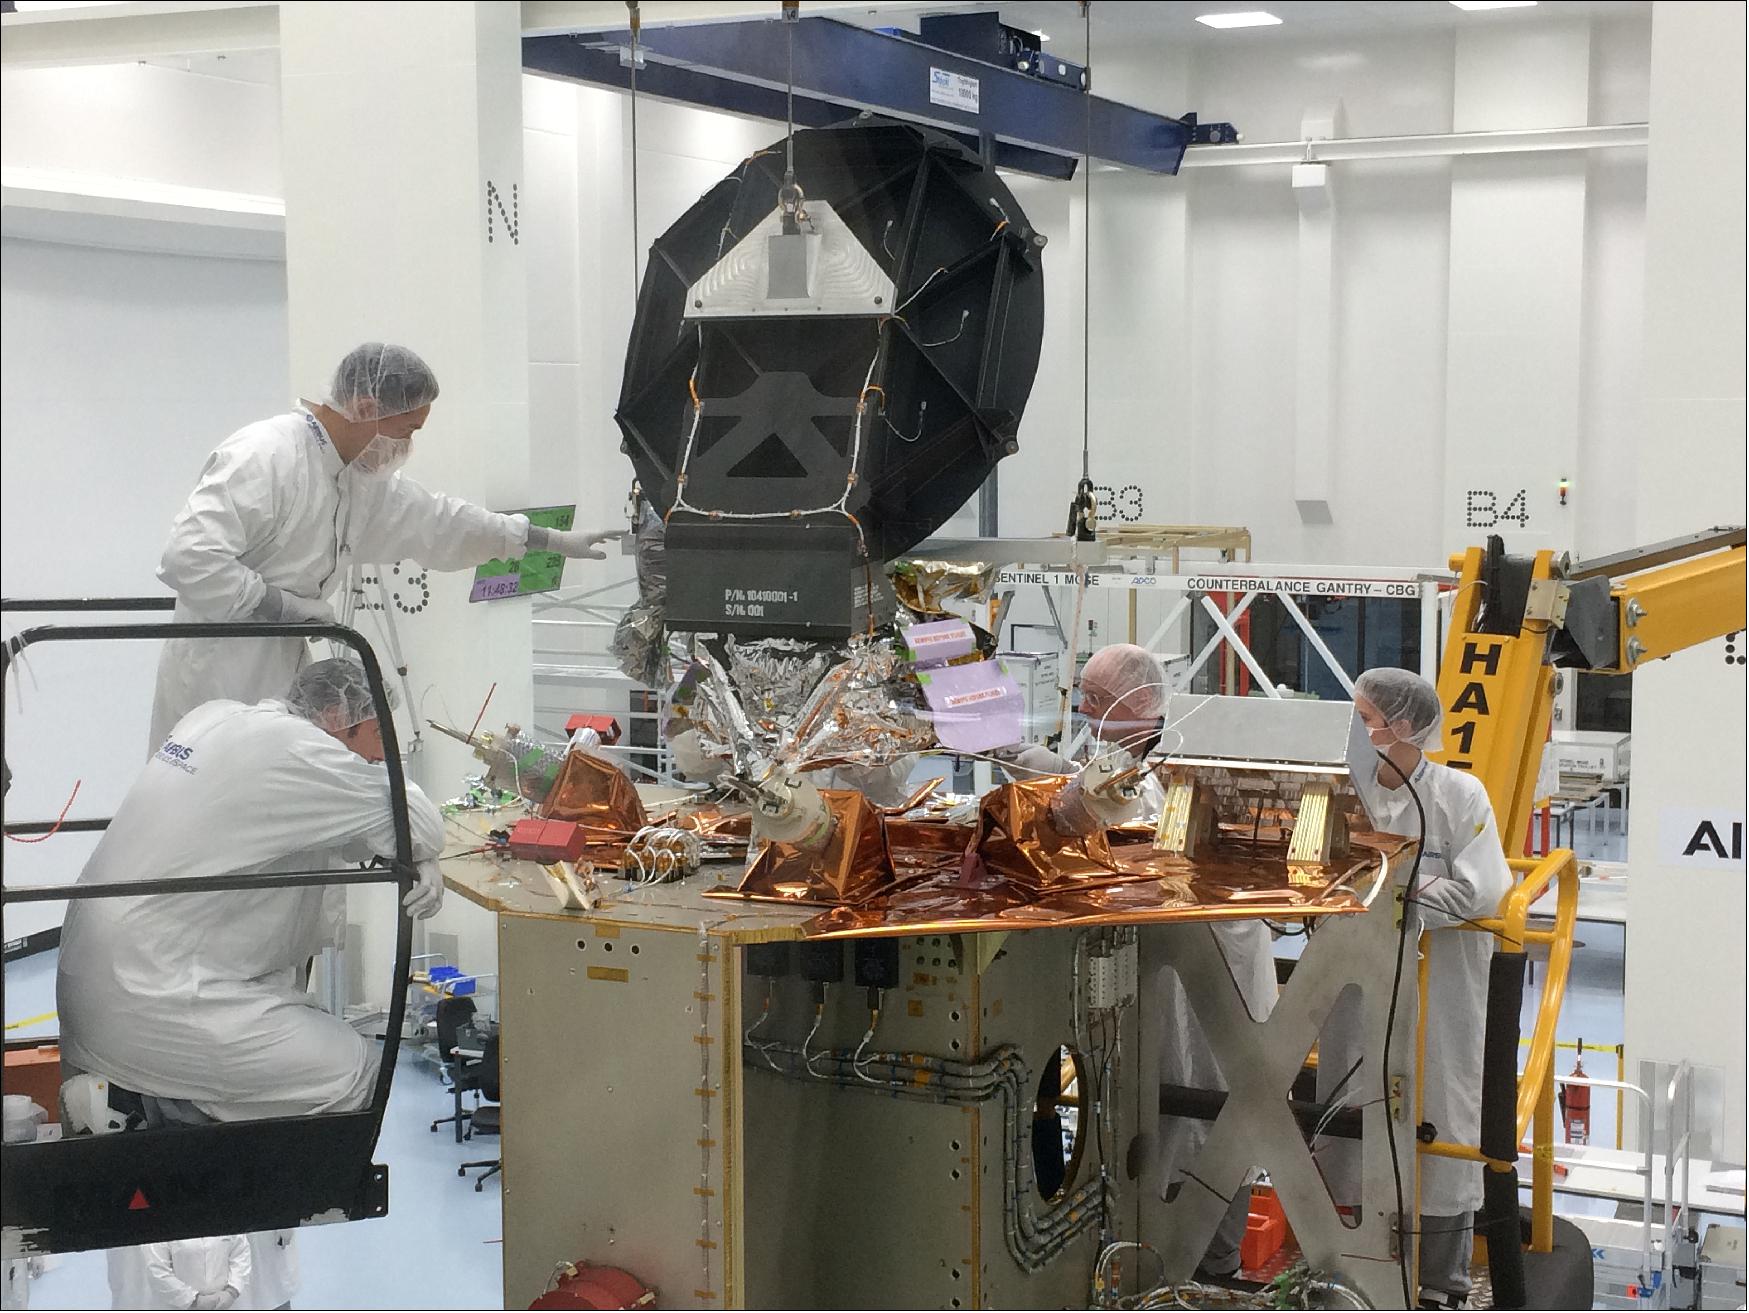 Figure 73: Copernicus Sentinel-6 radiometer integration. The AMR-C (Advanced Microwave Radiometer for Climate monitoring) is being integrated on to the Copernicus Sentinel-6A satellite. The photo shows teams at Airbus in Friedrichshafen, Germany, lowering the instrument on to the satellite prior to mechanical mounting and alignment checks. As part of the international cooperation for this mission, the radiometer has been supplied by NASA/JPL. The satellite's main instrument is a radar altimeter to measure sea-surface height. The radiometer accounts for the amount of water vapor in atmosphere, which affects the speed of the altimeter's radar pulses (image credit: Airbus)